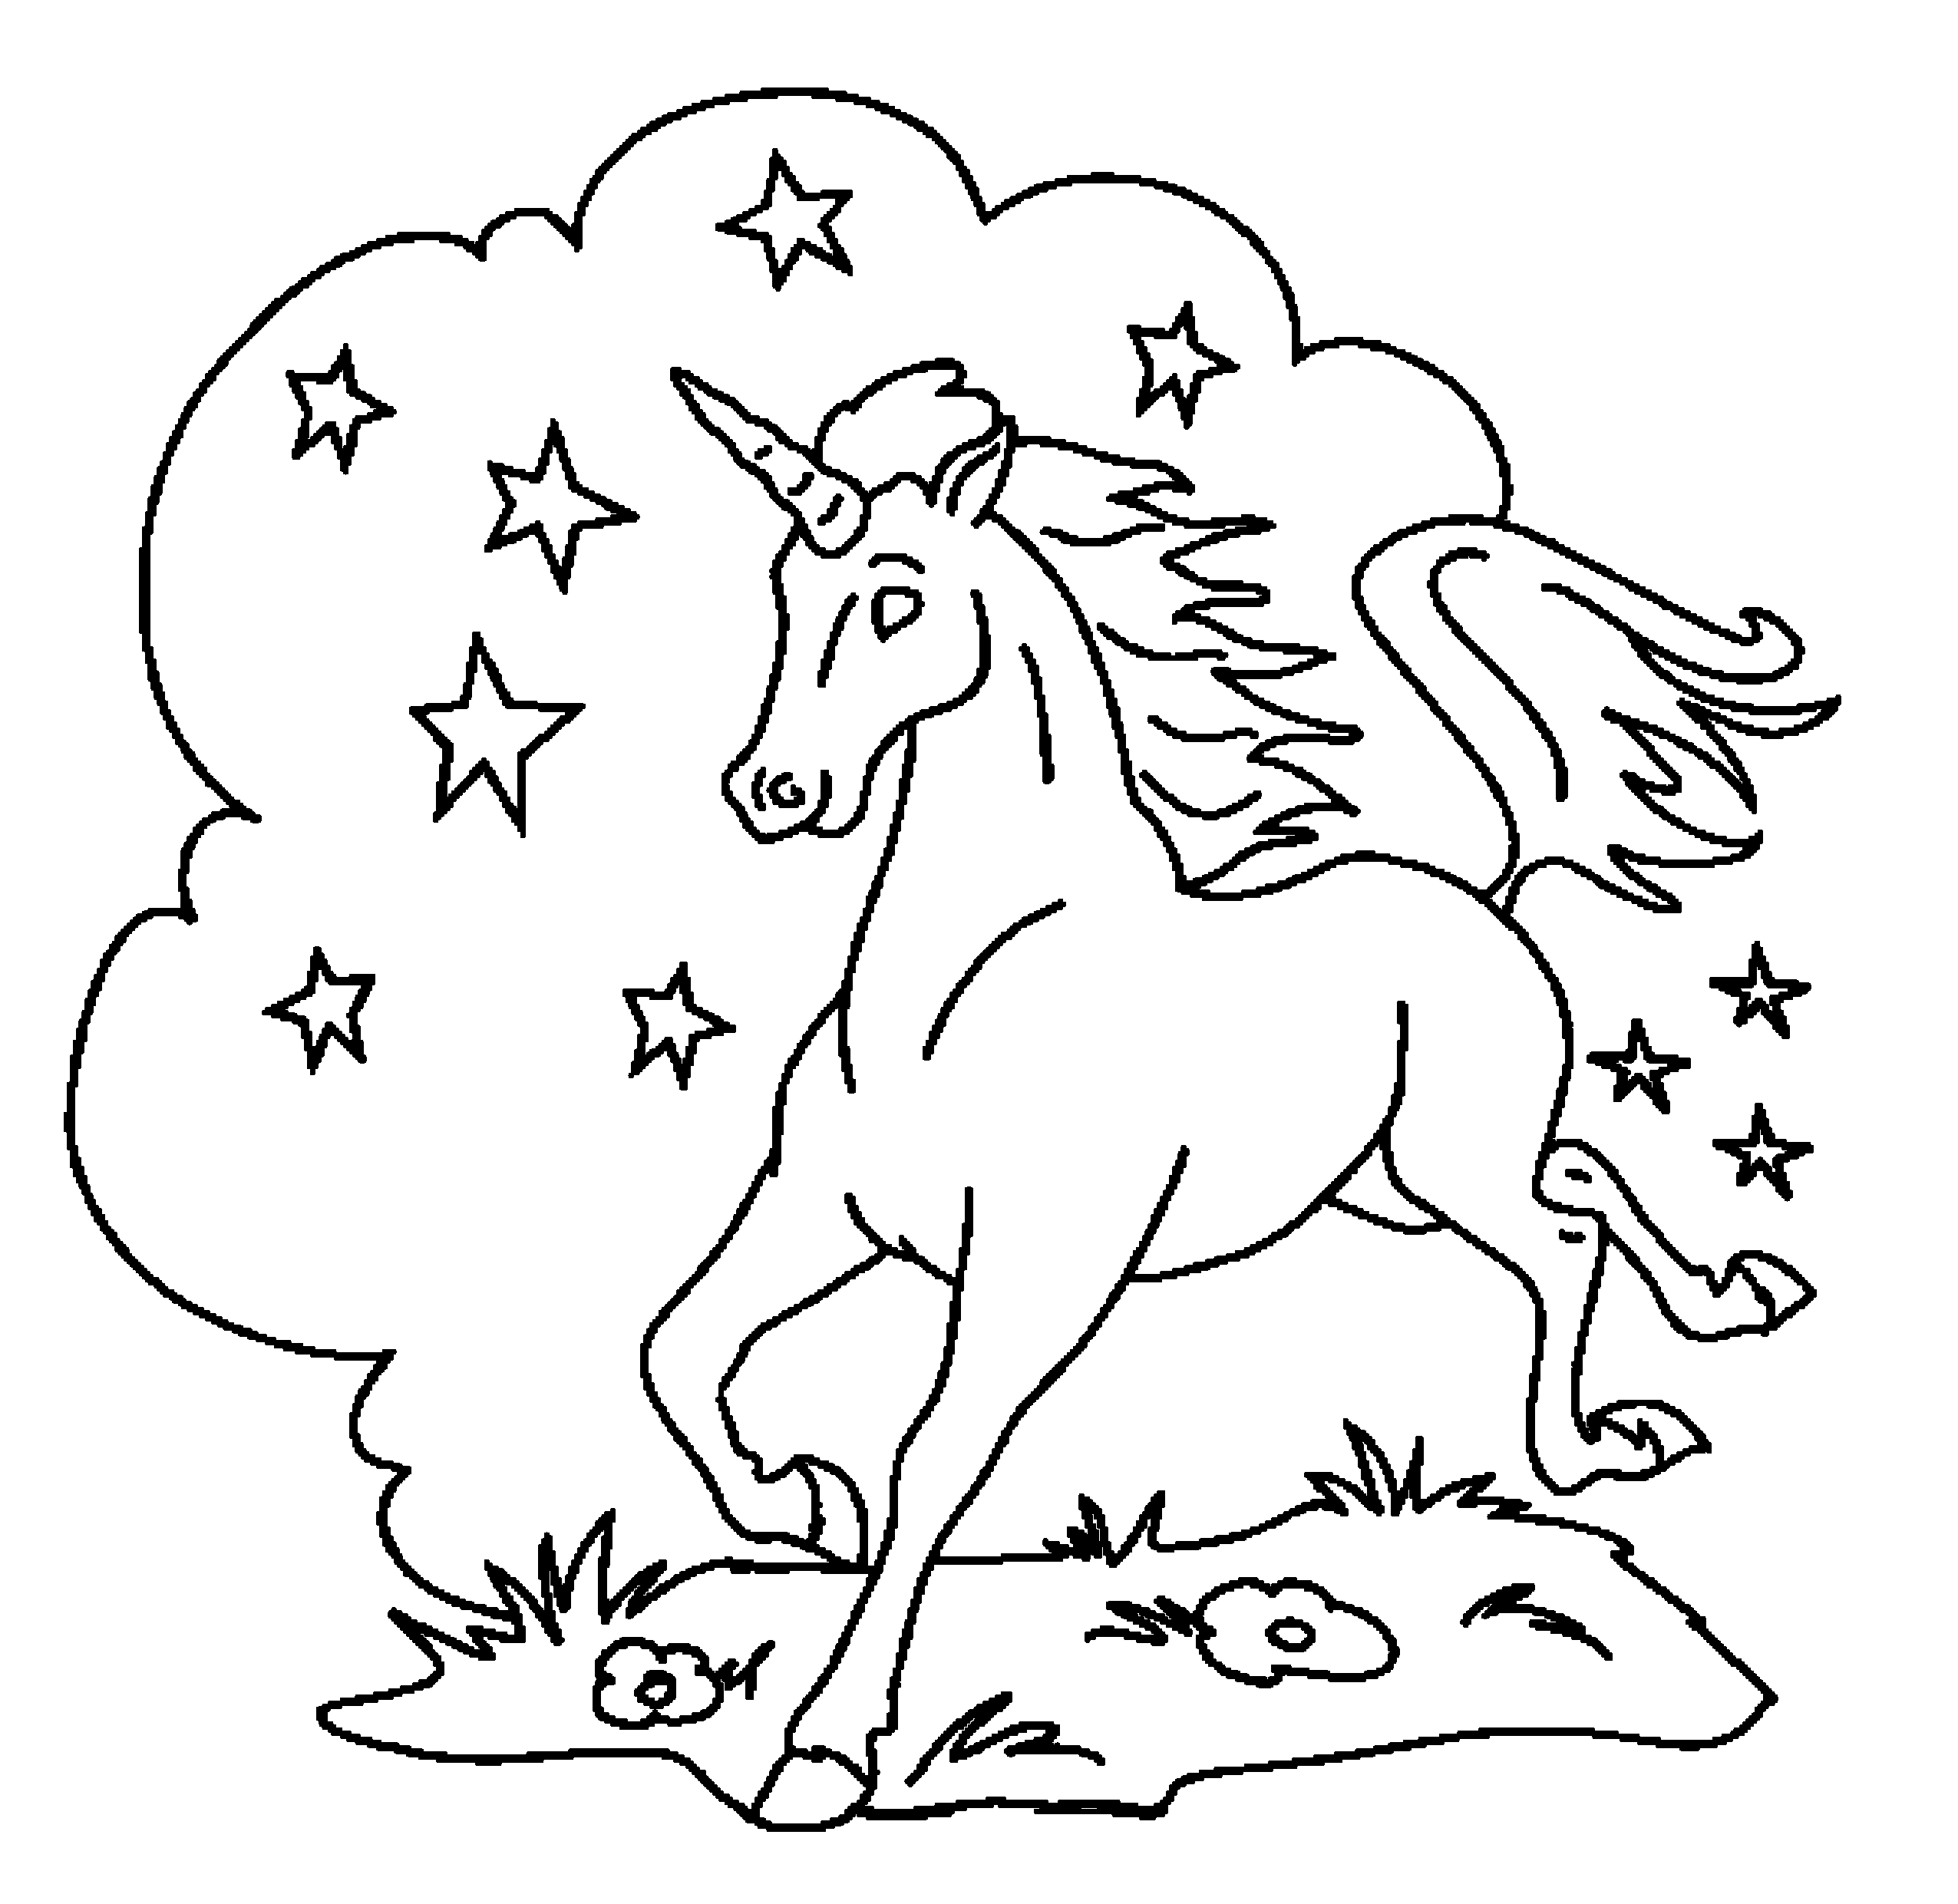 Print & Download Unicorn Coloring Pages for Children